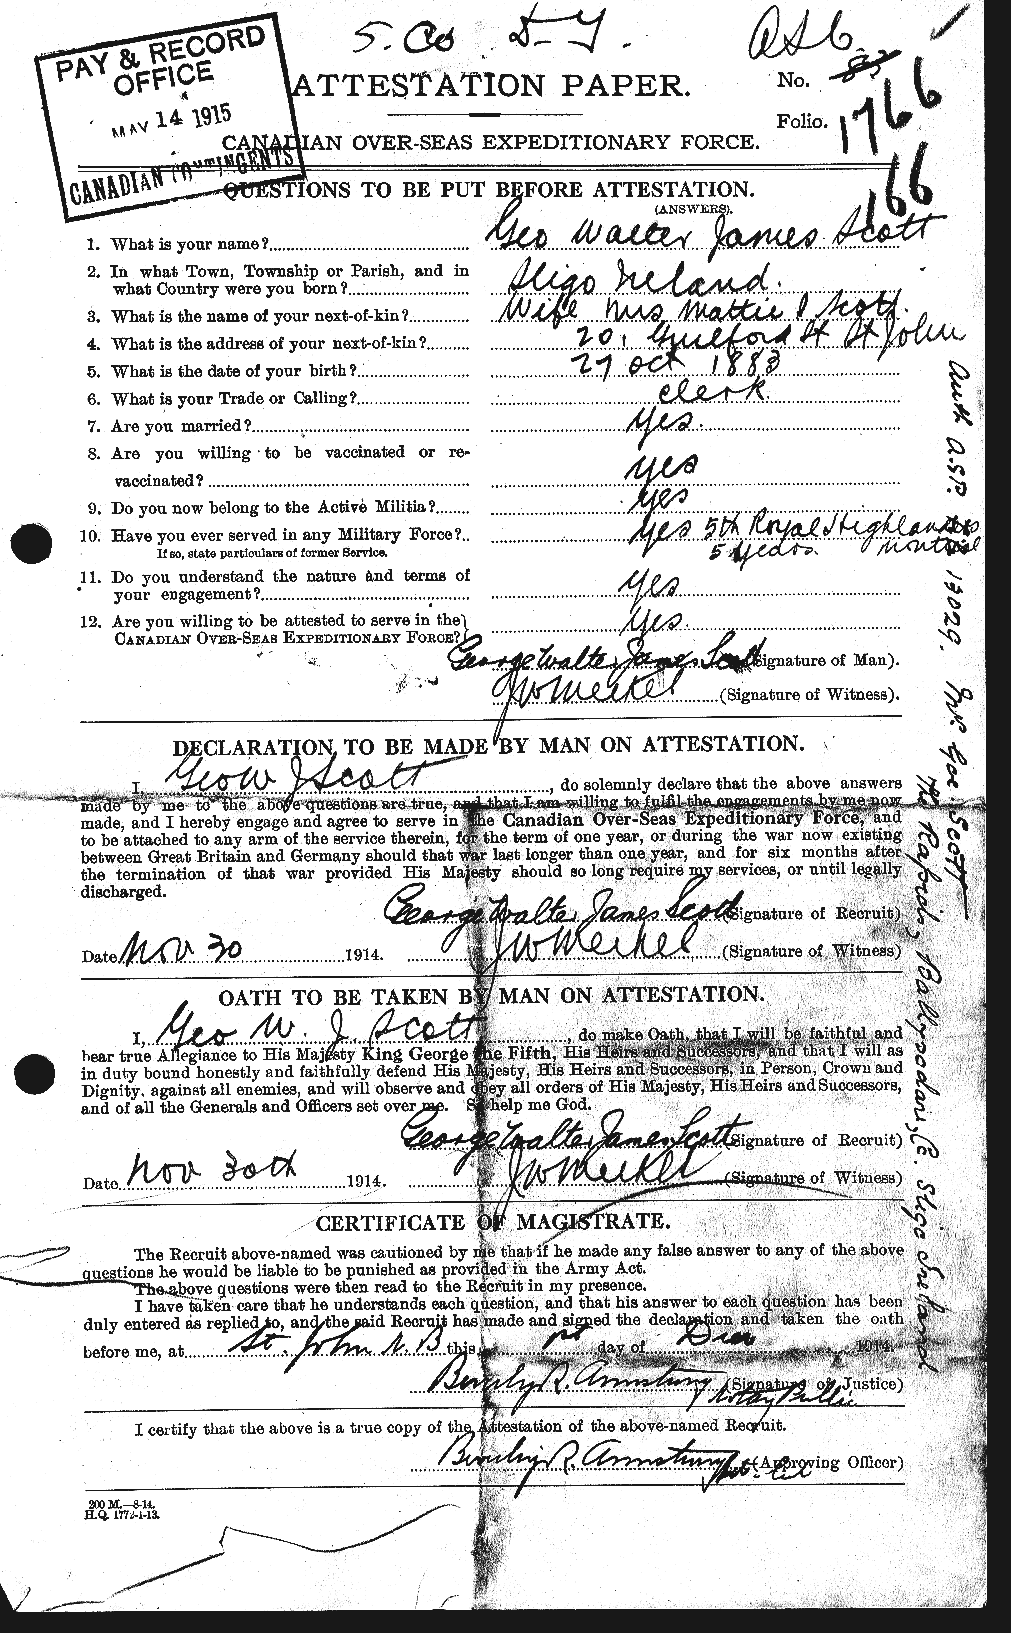 Personnel Records of the First World War - CEF 083135a